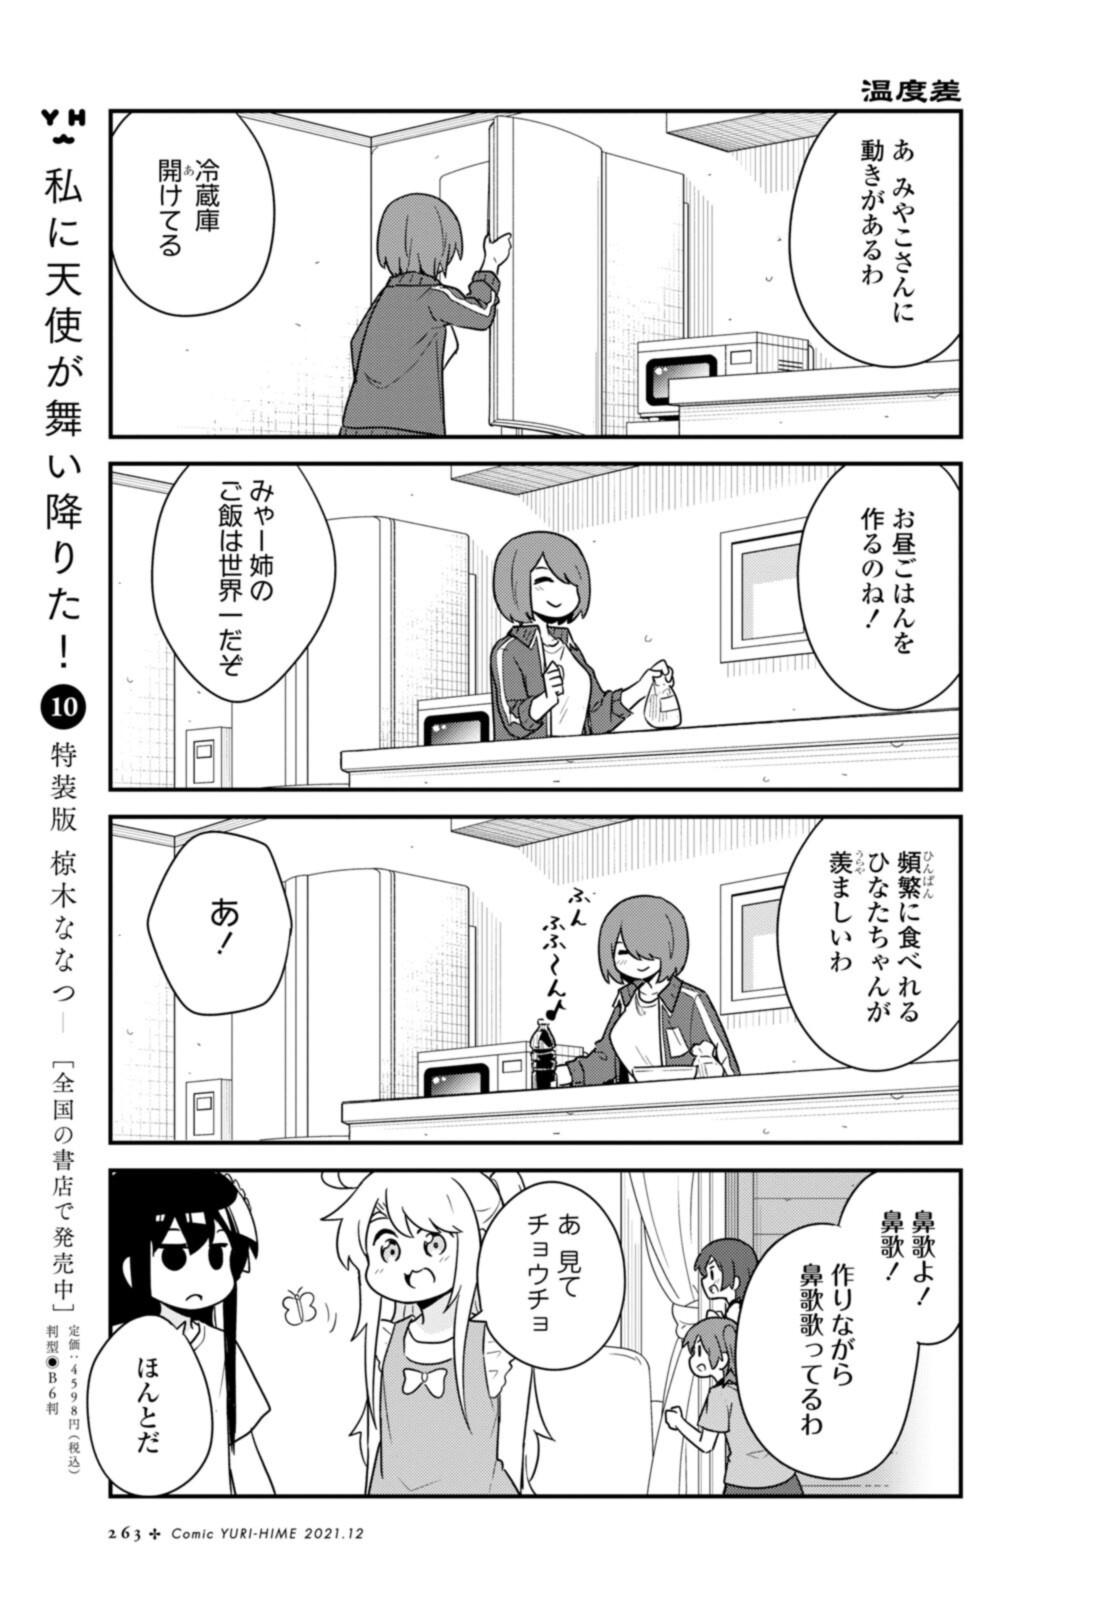 Wataten! An Angel Flew Down to Me 私に天使が舞い降りた！ 第90話 - Page 11